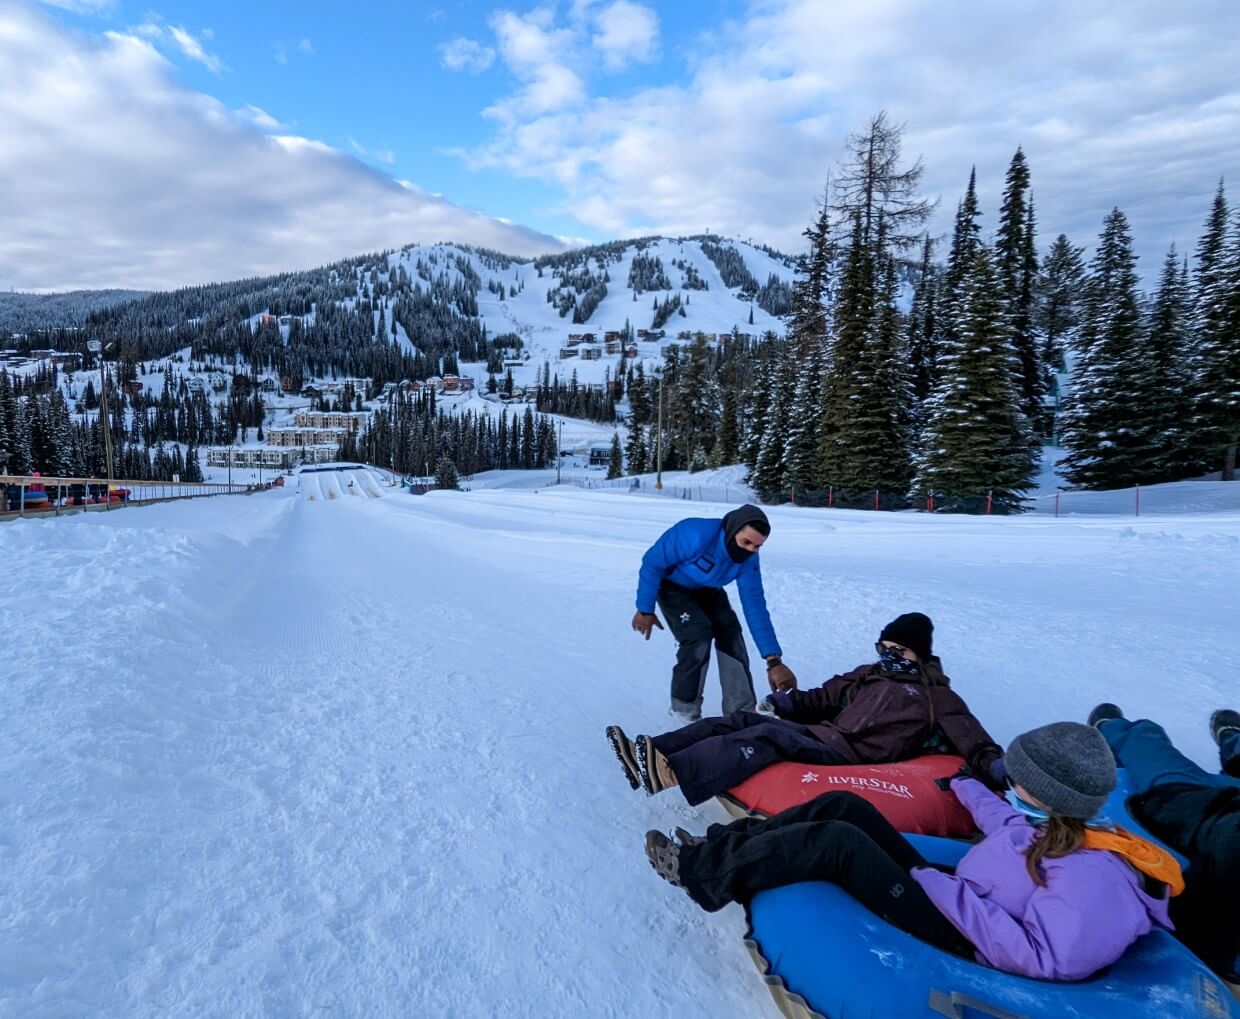 Three people sit in snow tubes waiting to slide down frozen slope at Silver Star Ski Resort